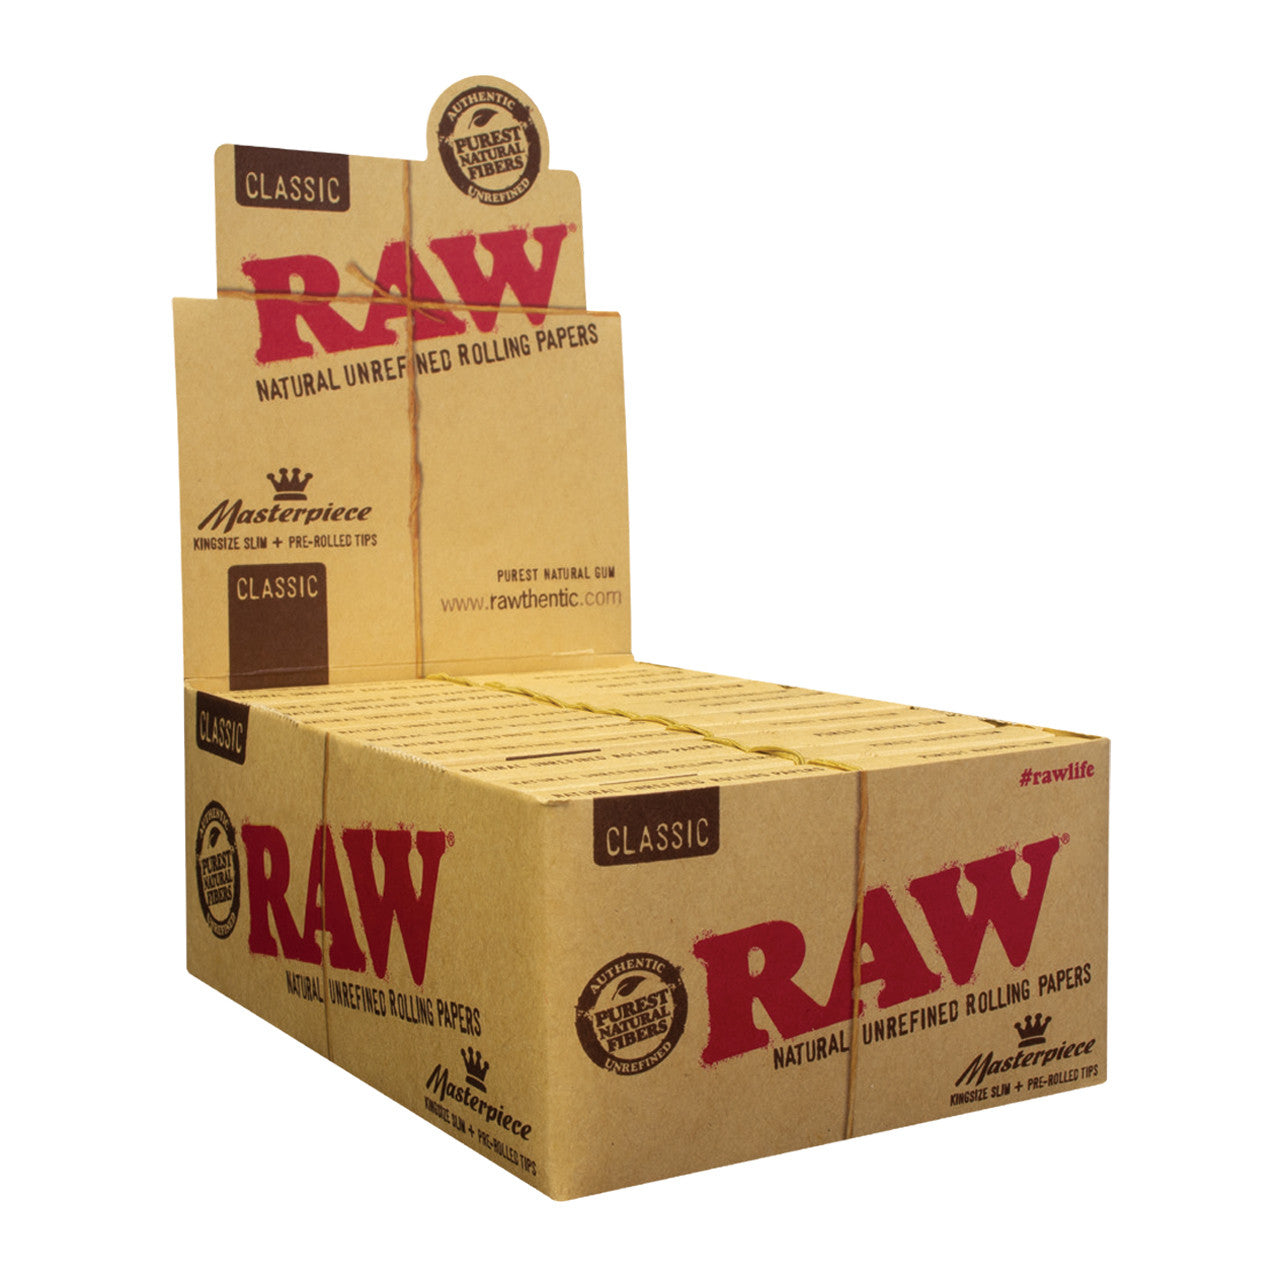 RAW Masterpiece King Size Slim Rolling Papers with Tips (32ct)